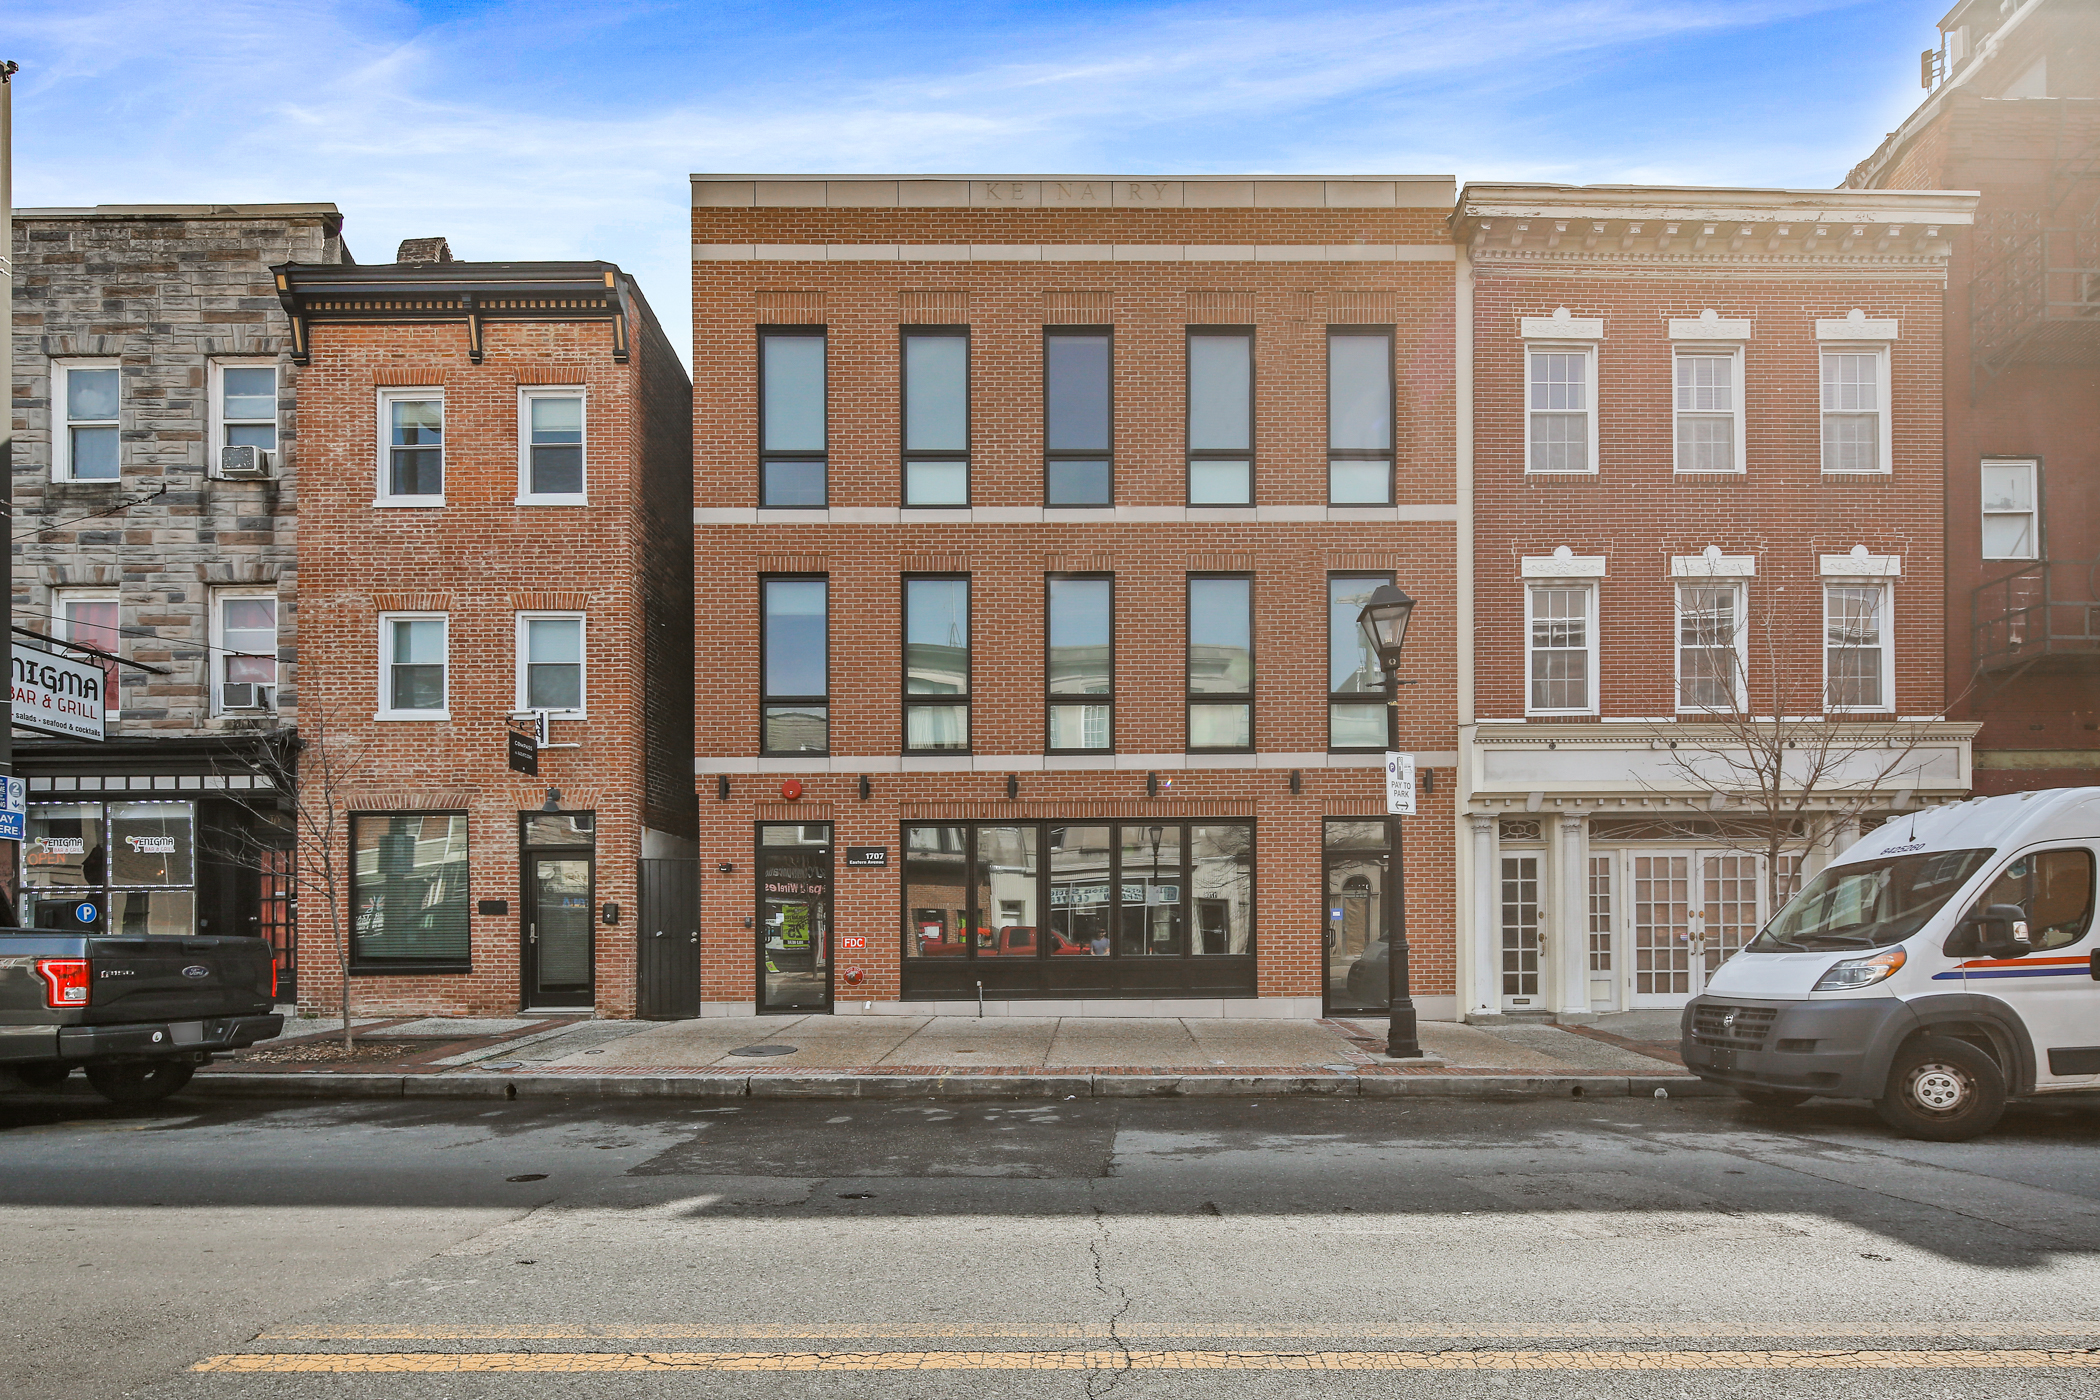 1707 Eastern Avenue: 11 Apartments/1 Retail Space in Historic Fells Point/New Construction.